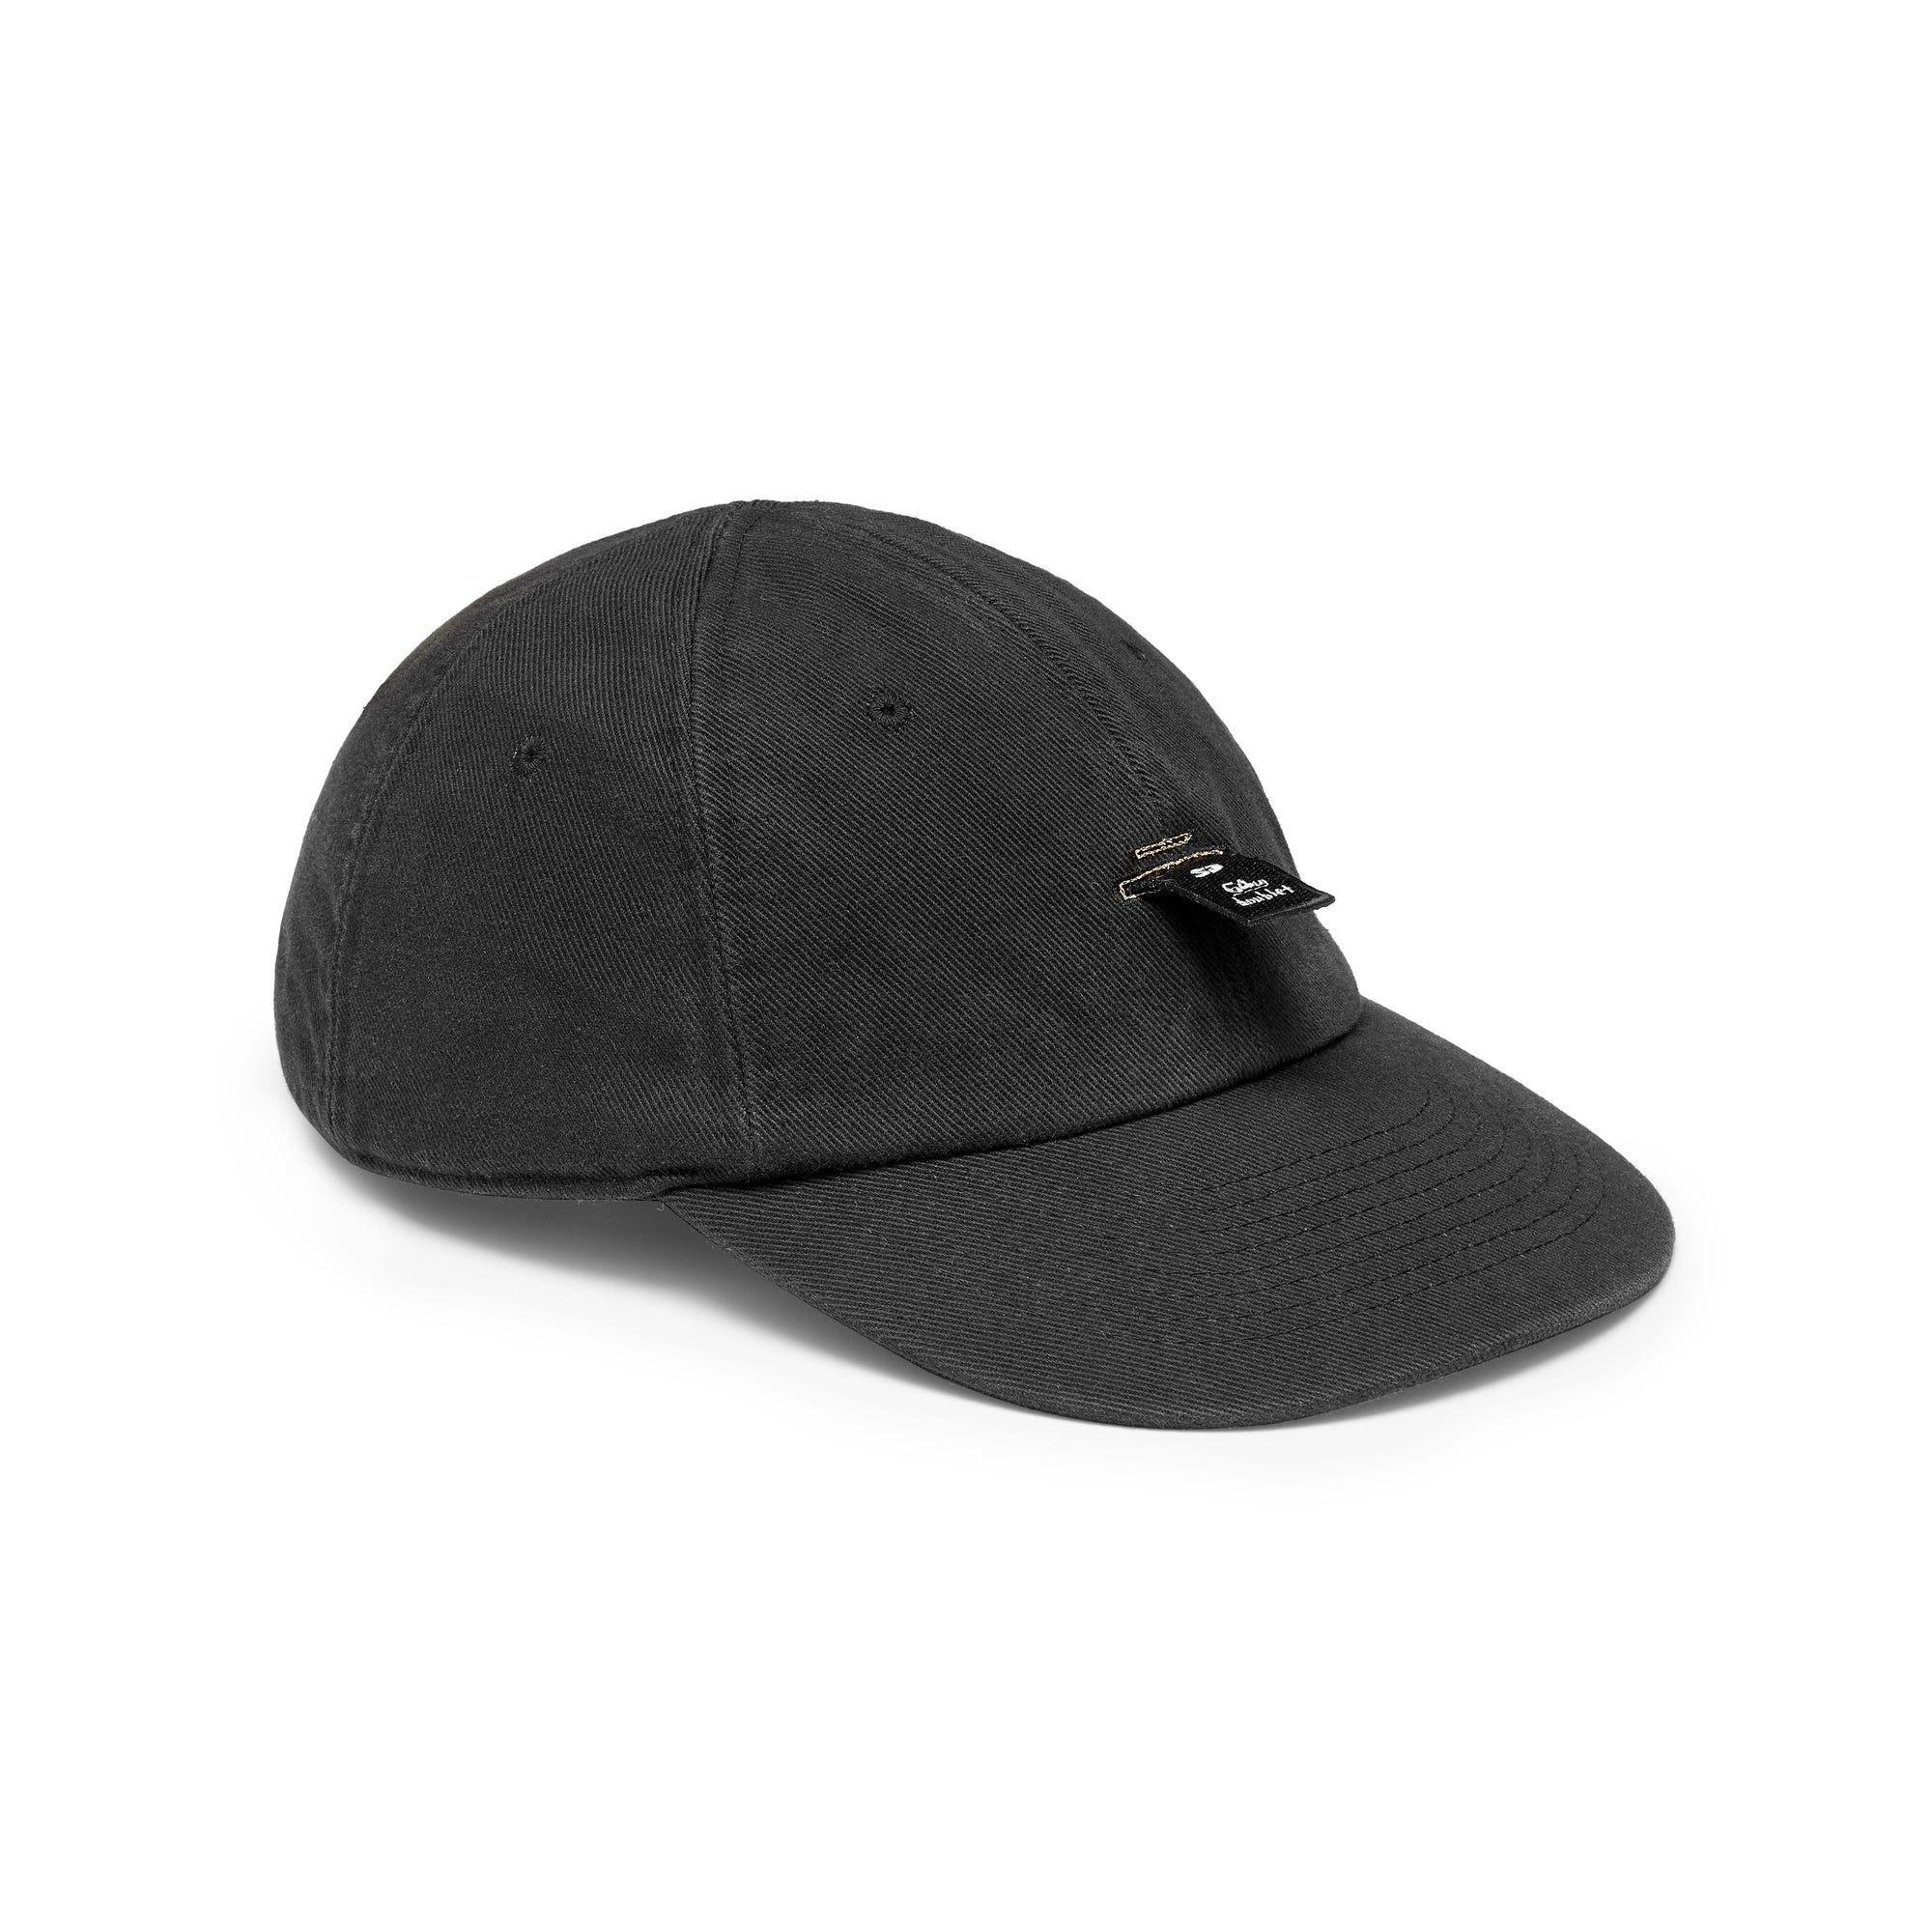 Doublet - Men's SD Card Embroidery Cap - (Black) view 2